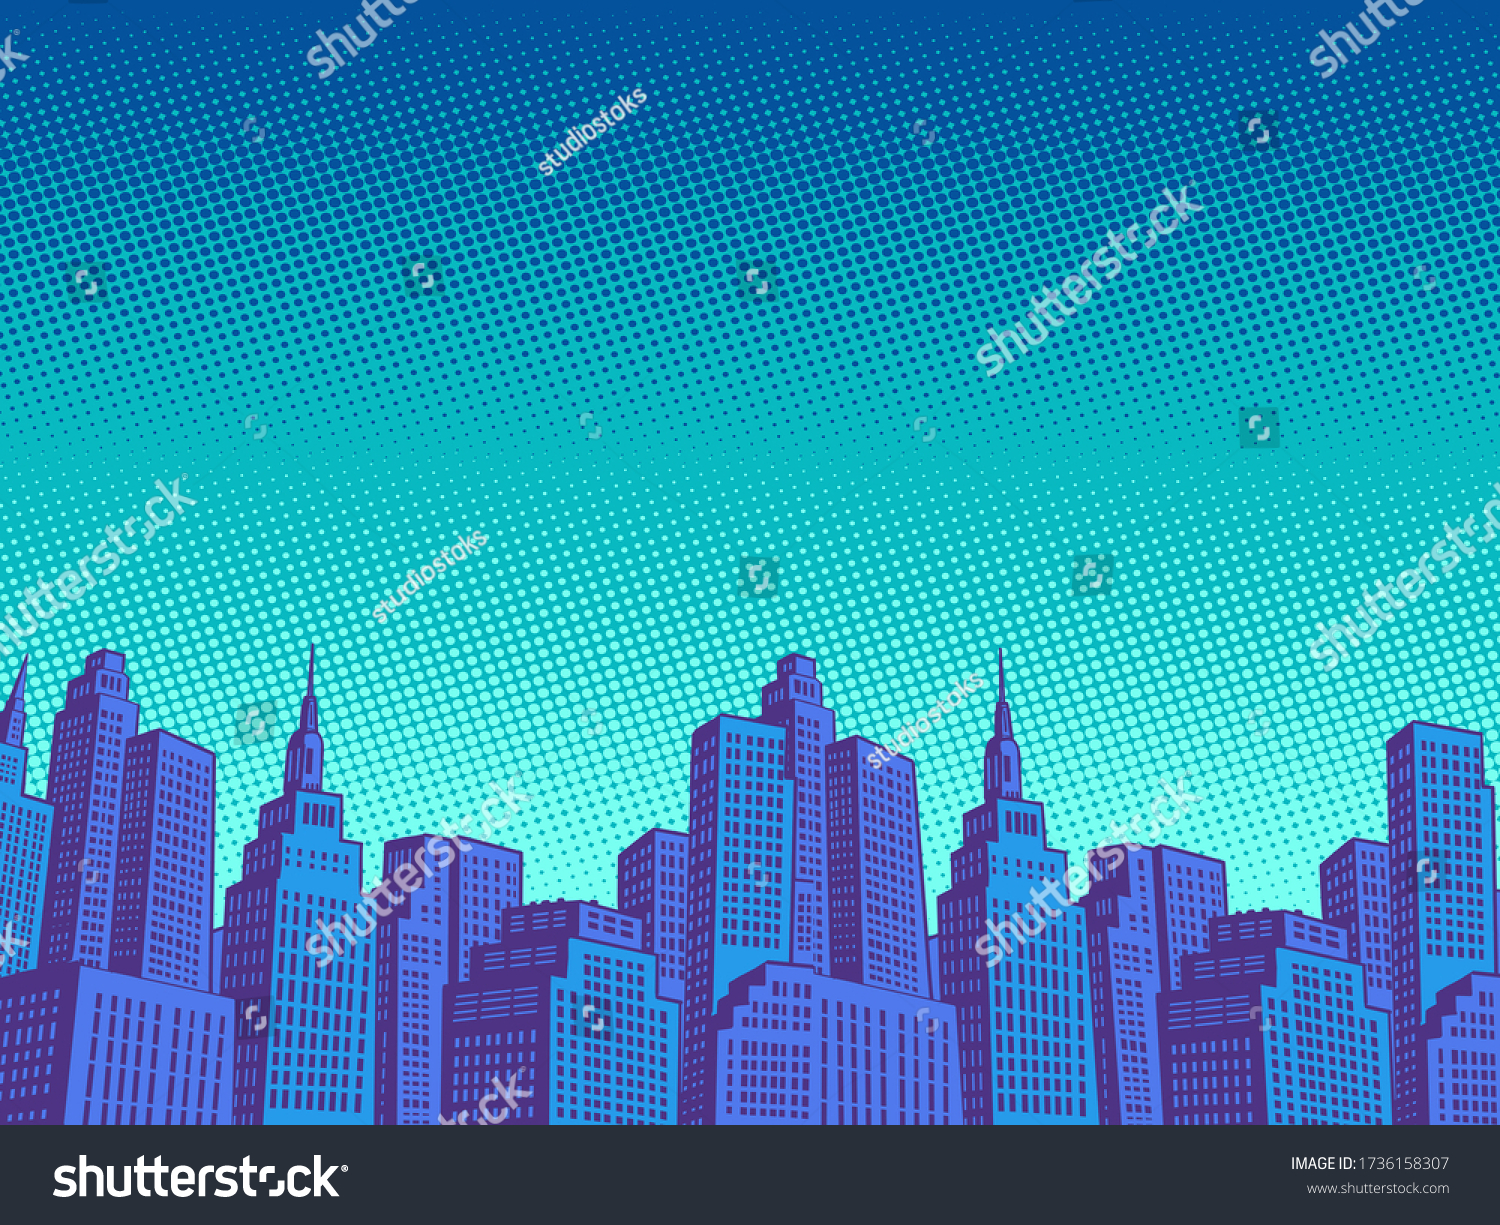 night modern city with skyscrapers. Pop art retro vector illustration vitch vintage 50s 60s style #1736158307